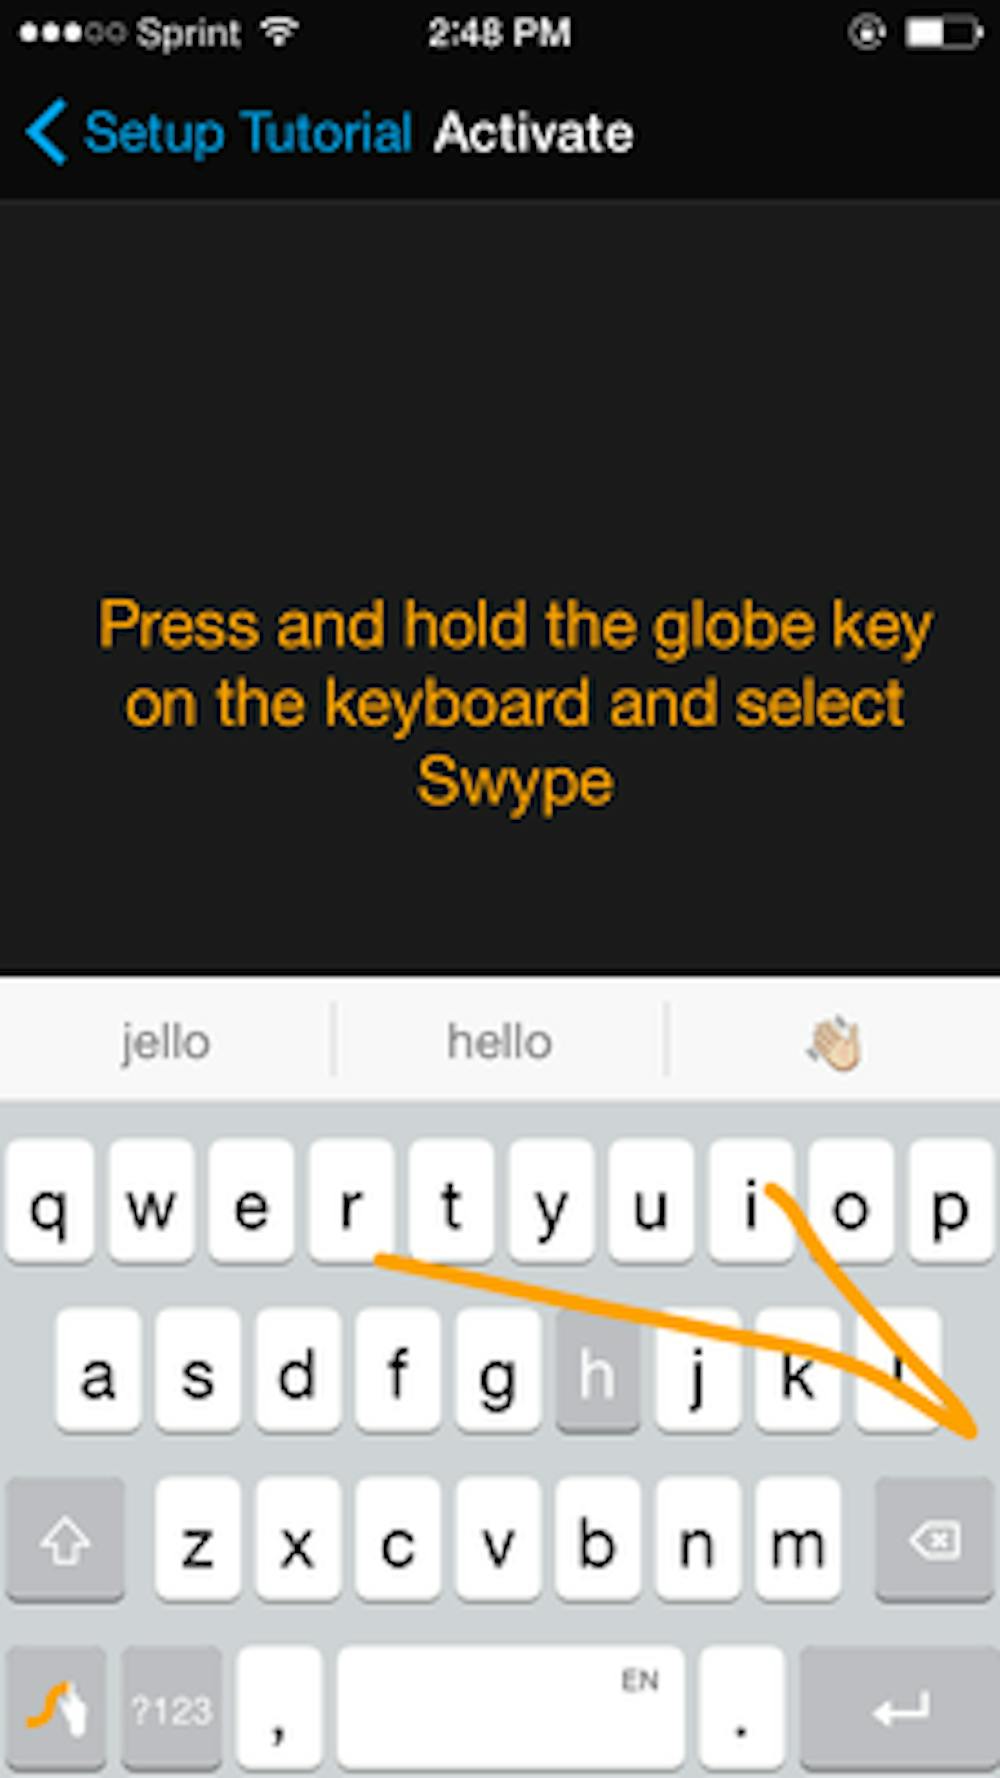 Swype replaces your keyboard. (Kyle Nazario | Intrigue Editor)